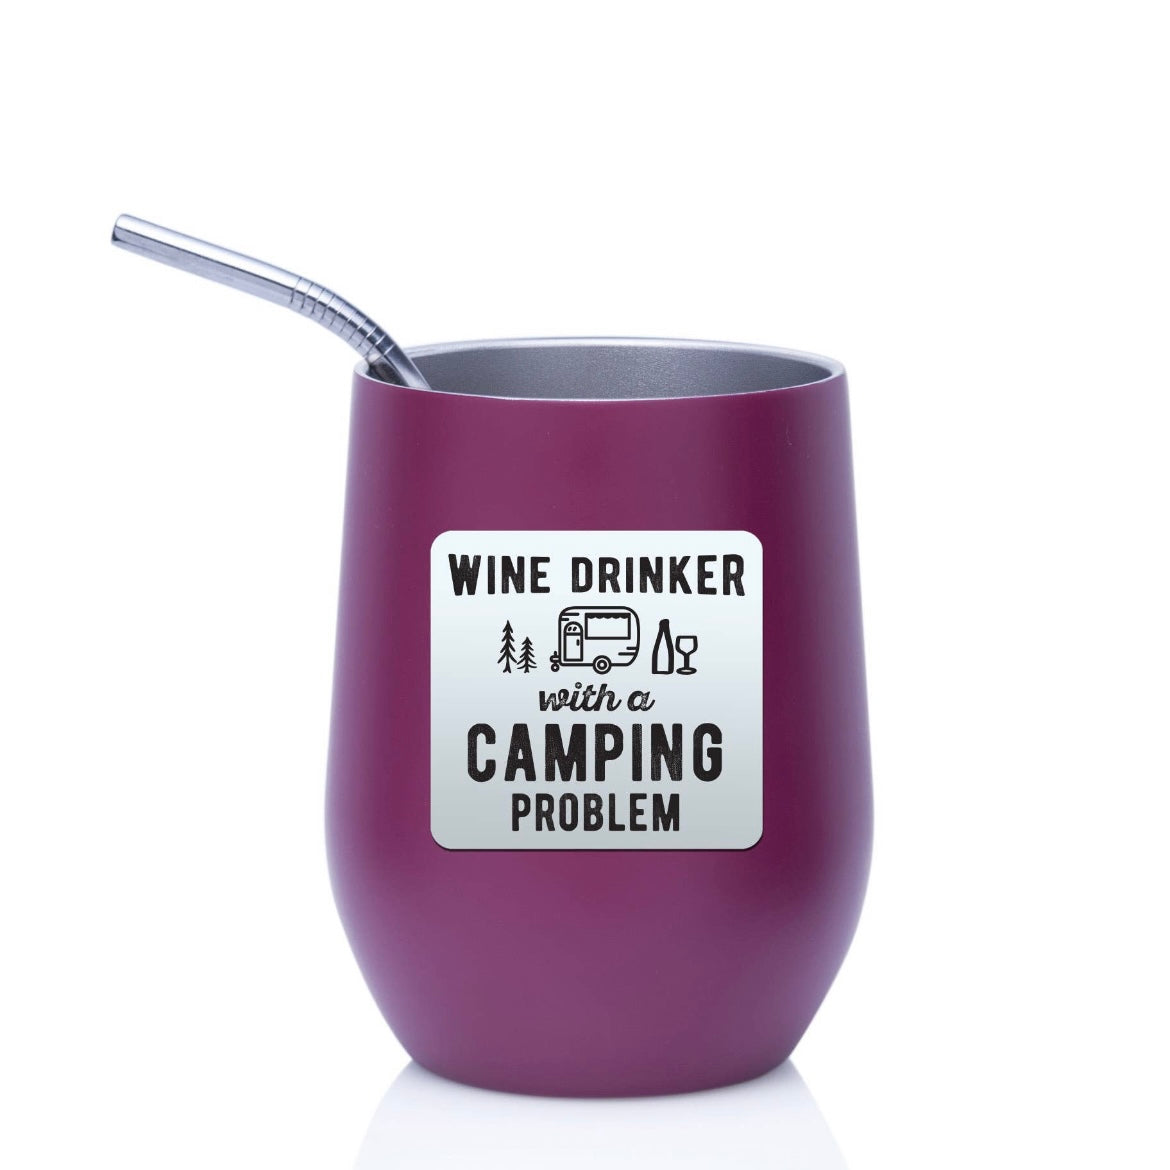 Sticker, Wine Drinker with a Camping Problem